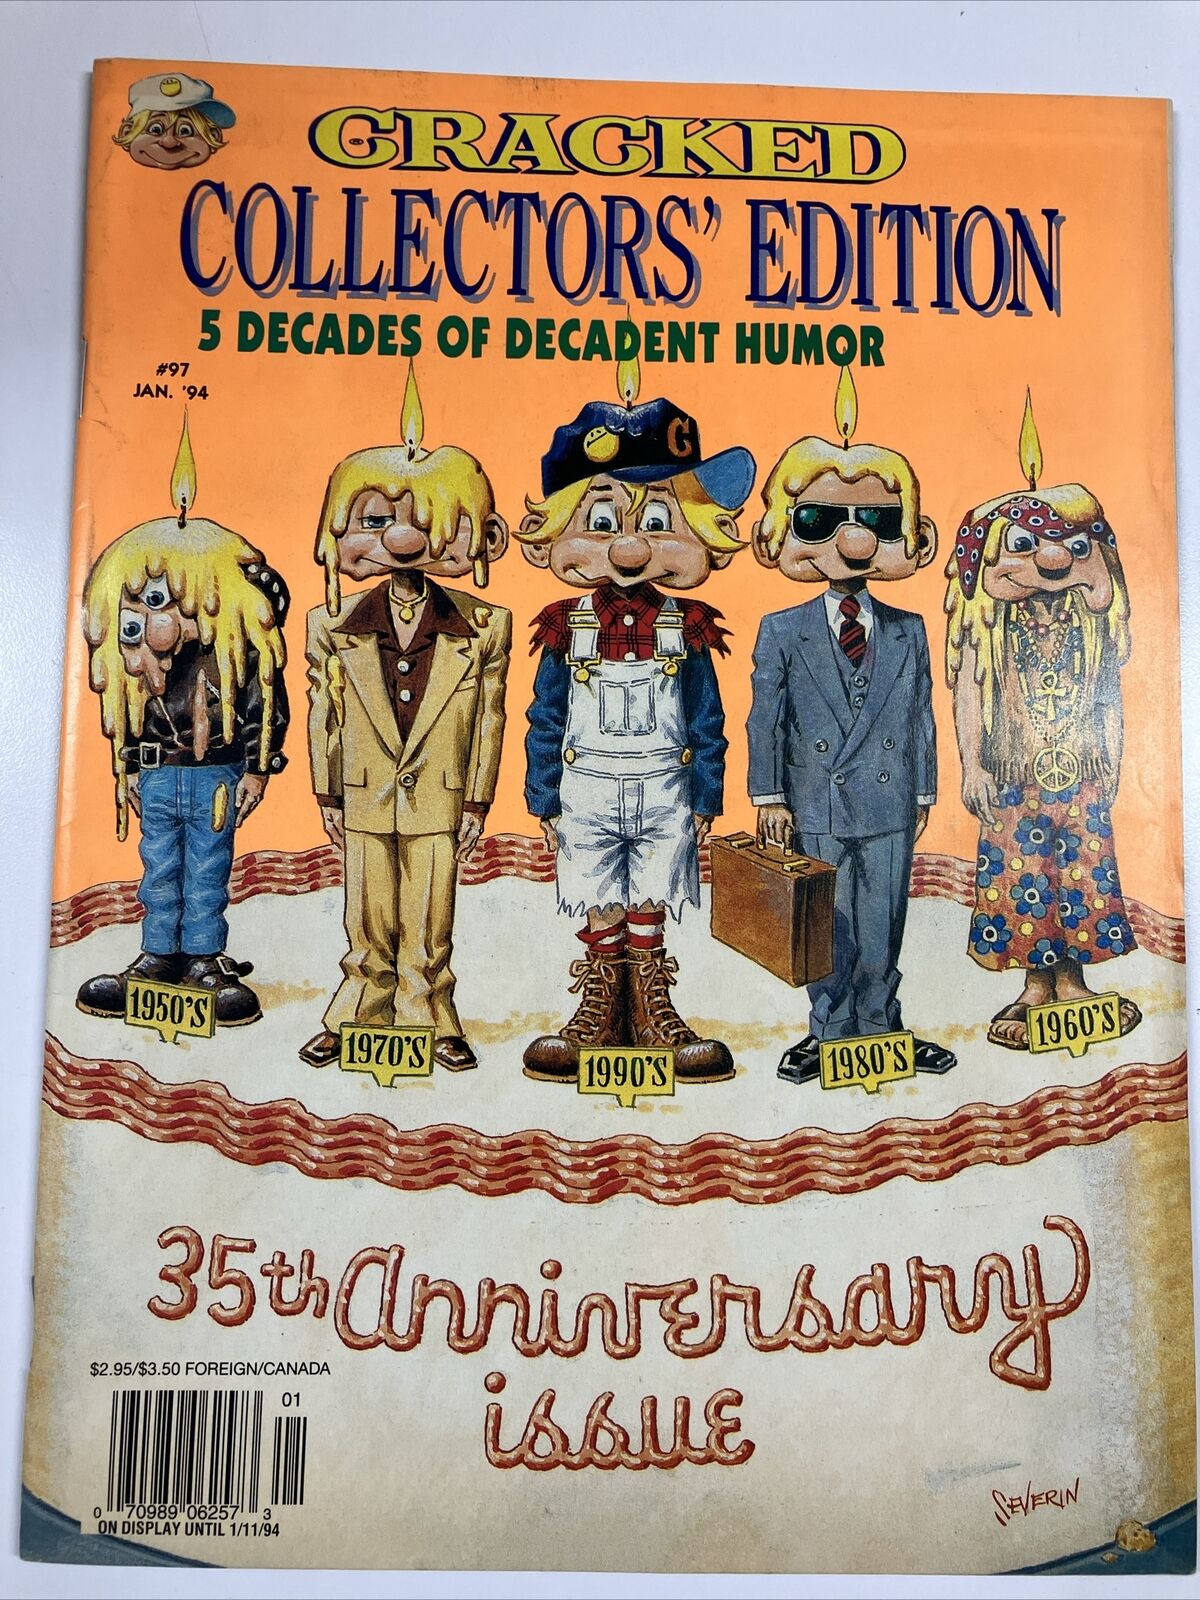 1994 Cracked Collectors Edition #97 Very Good By Major Magazine 35th Anniversary